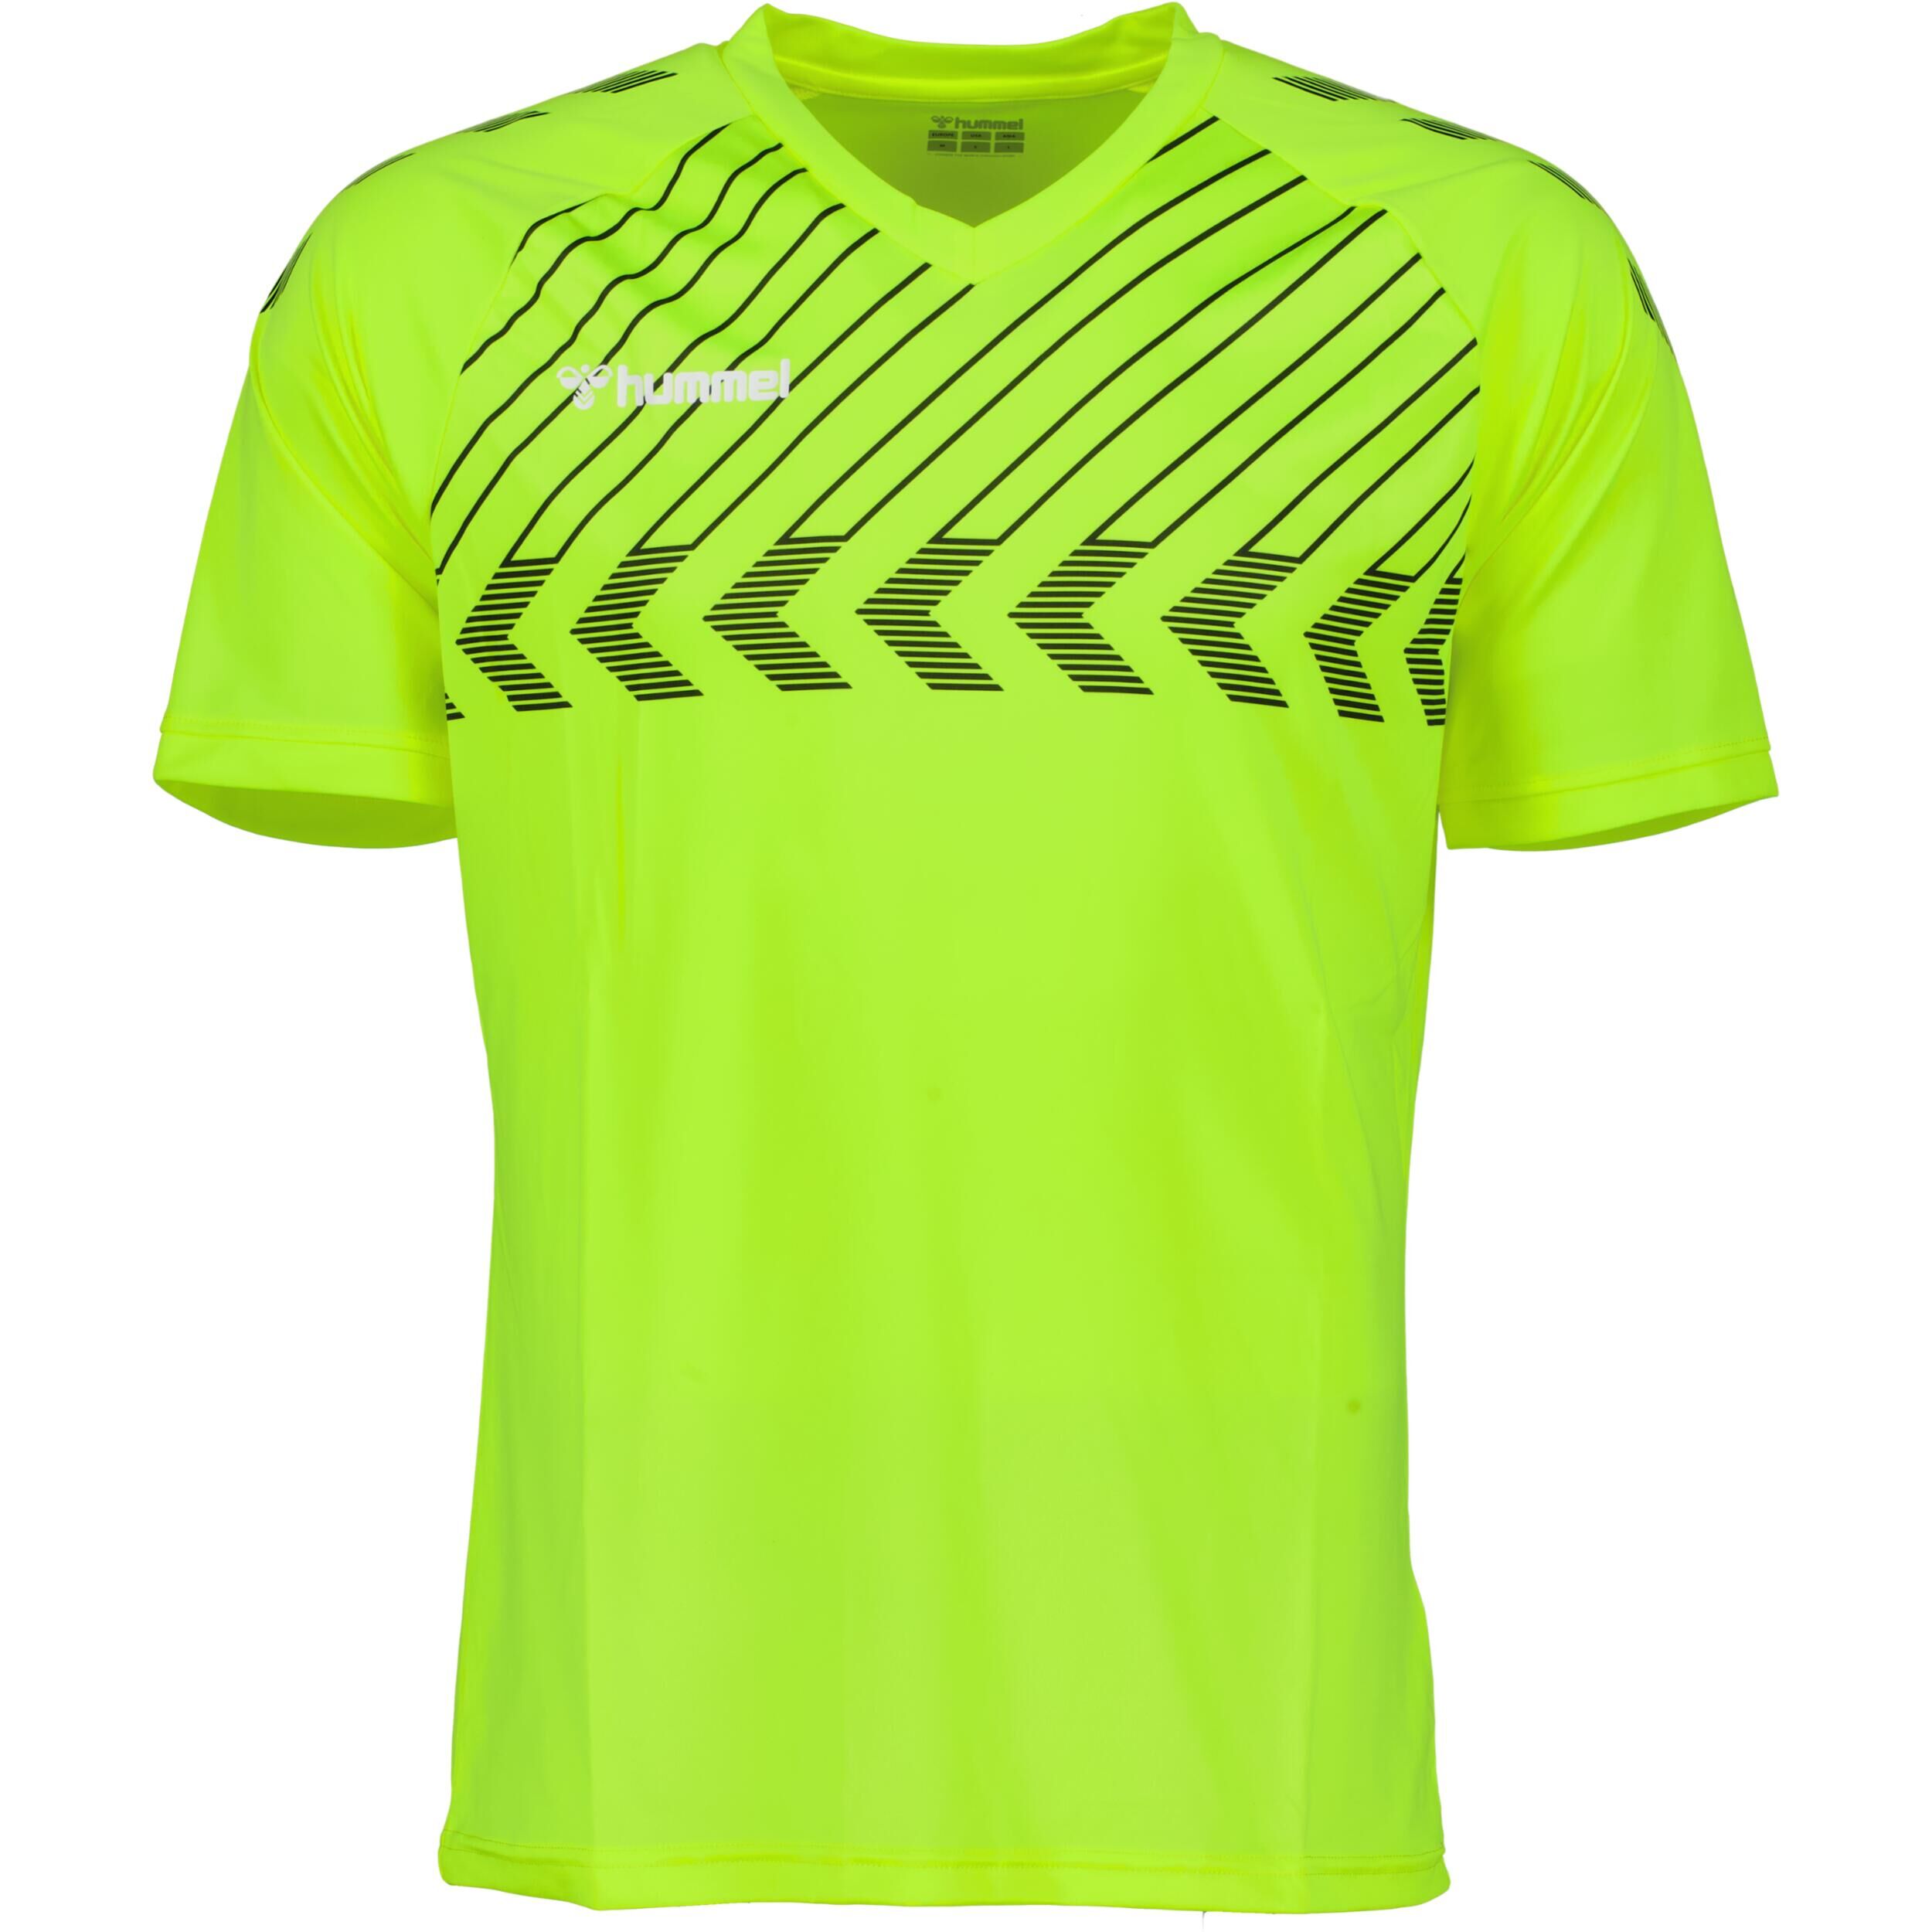 HUMMEL Poly jersey for men, great for football, in safety yellow